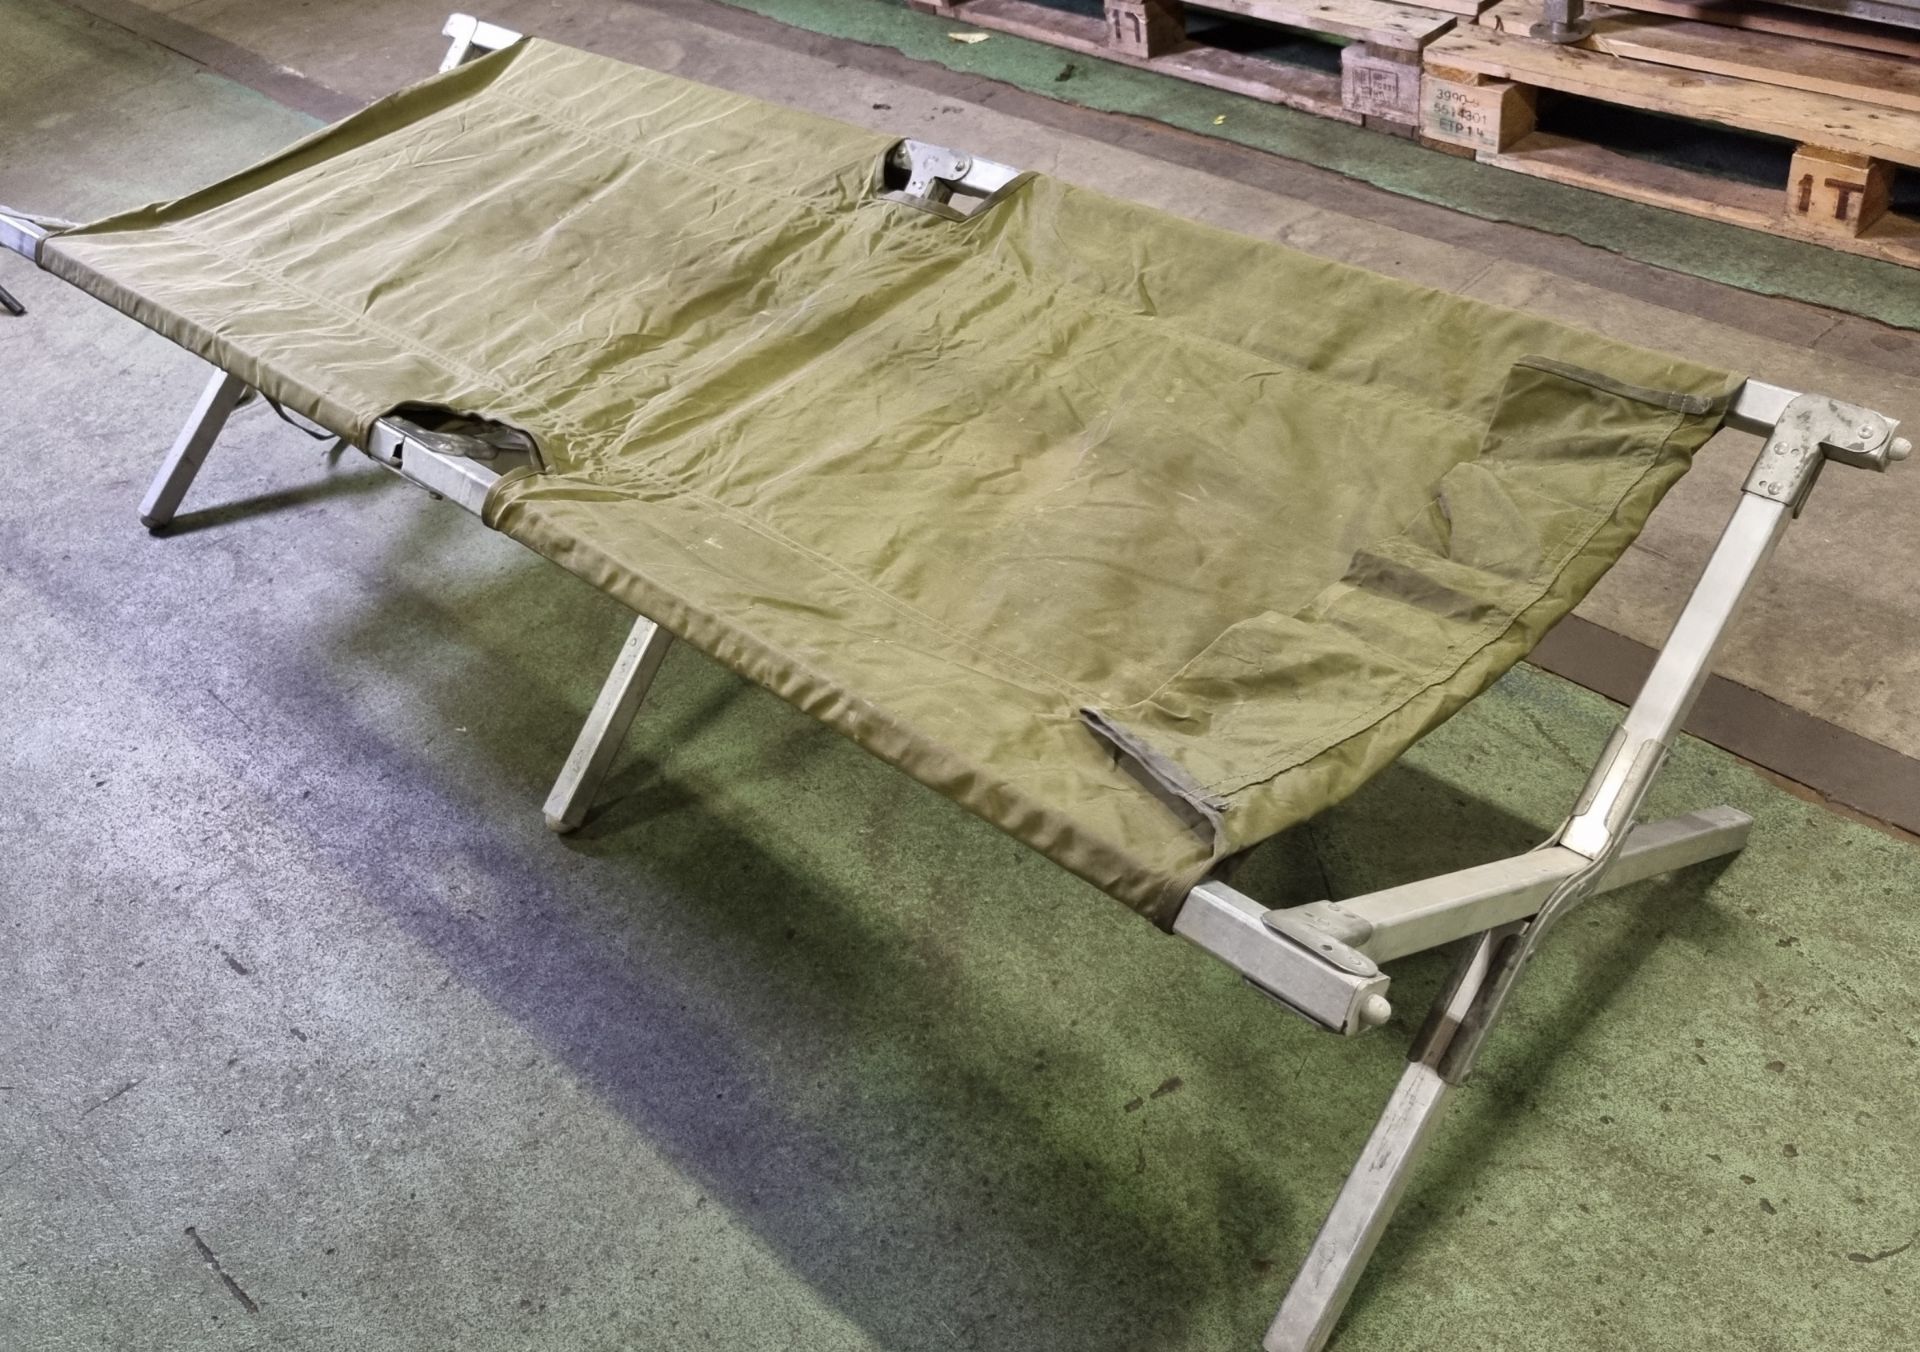 6x folding field cots - L 1900 x W 700 x H 450mm - SPARES OR REPAIRS - Image 5 of 5